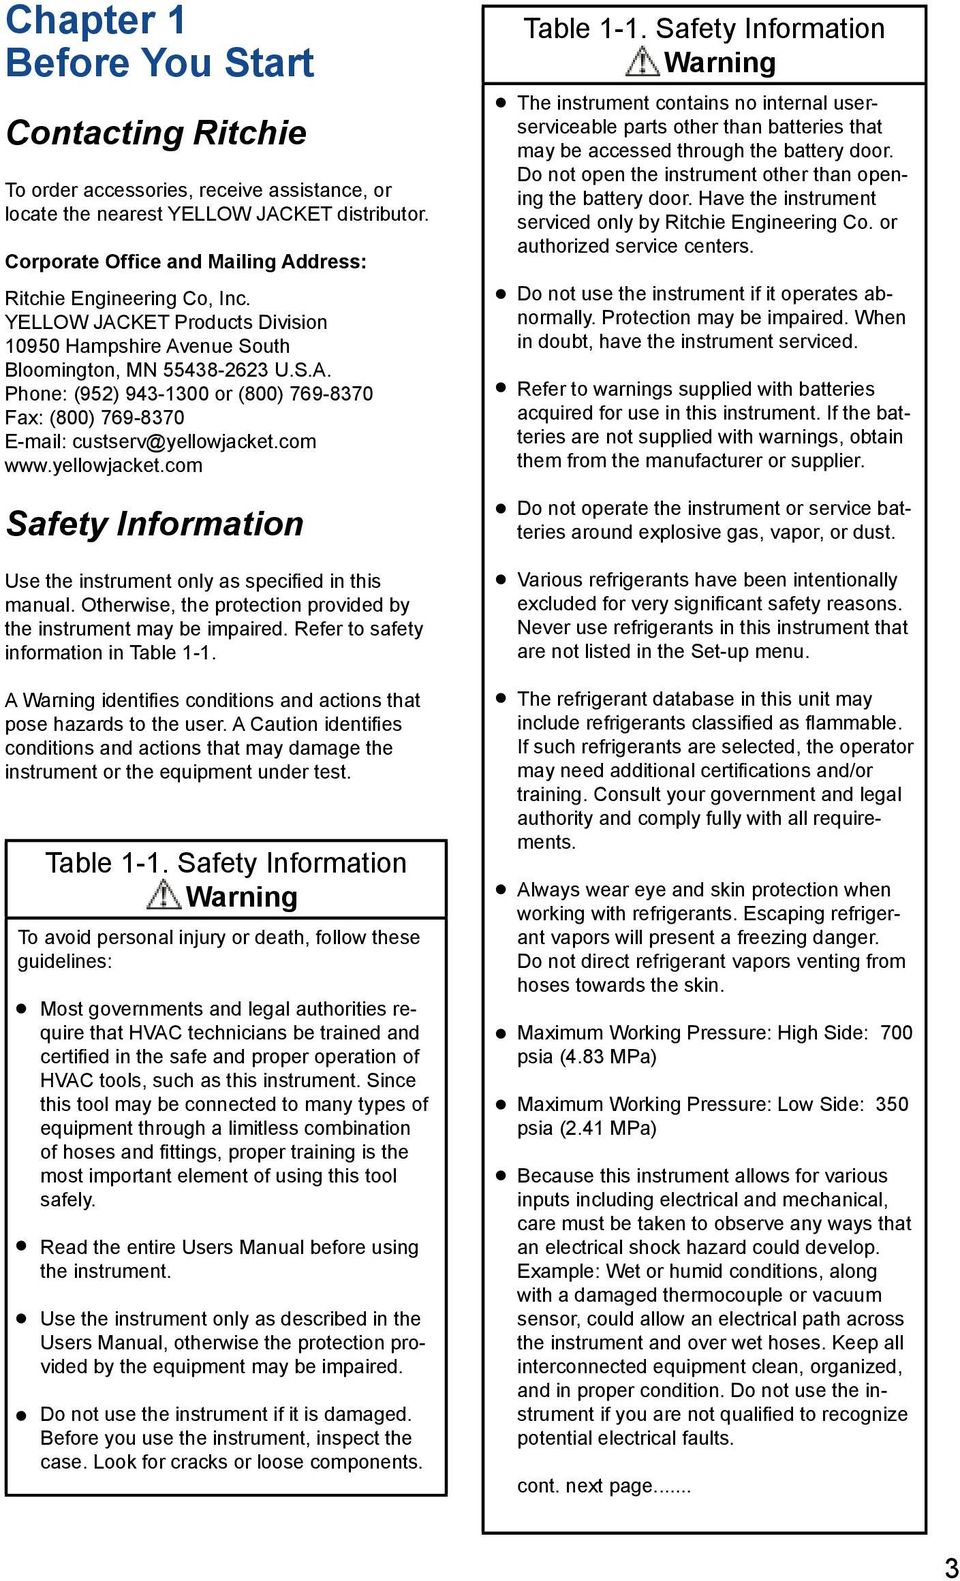 com www.yellowjacket.com Safety Information Use the instrument only as specified in this manual. Otherwise, the protection provided by the instrument may be impaired.